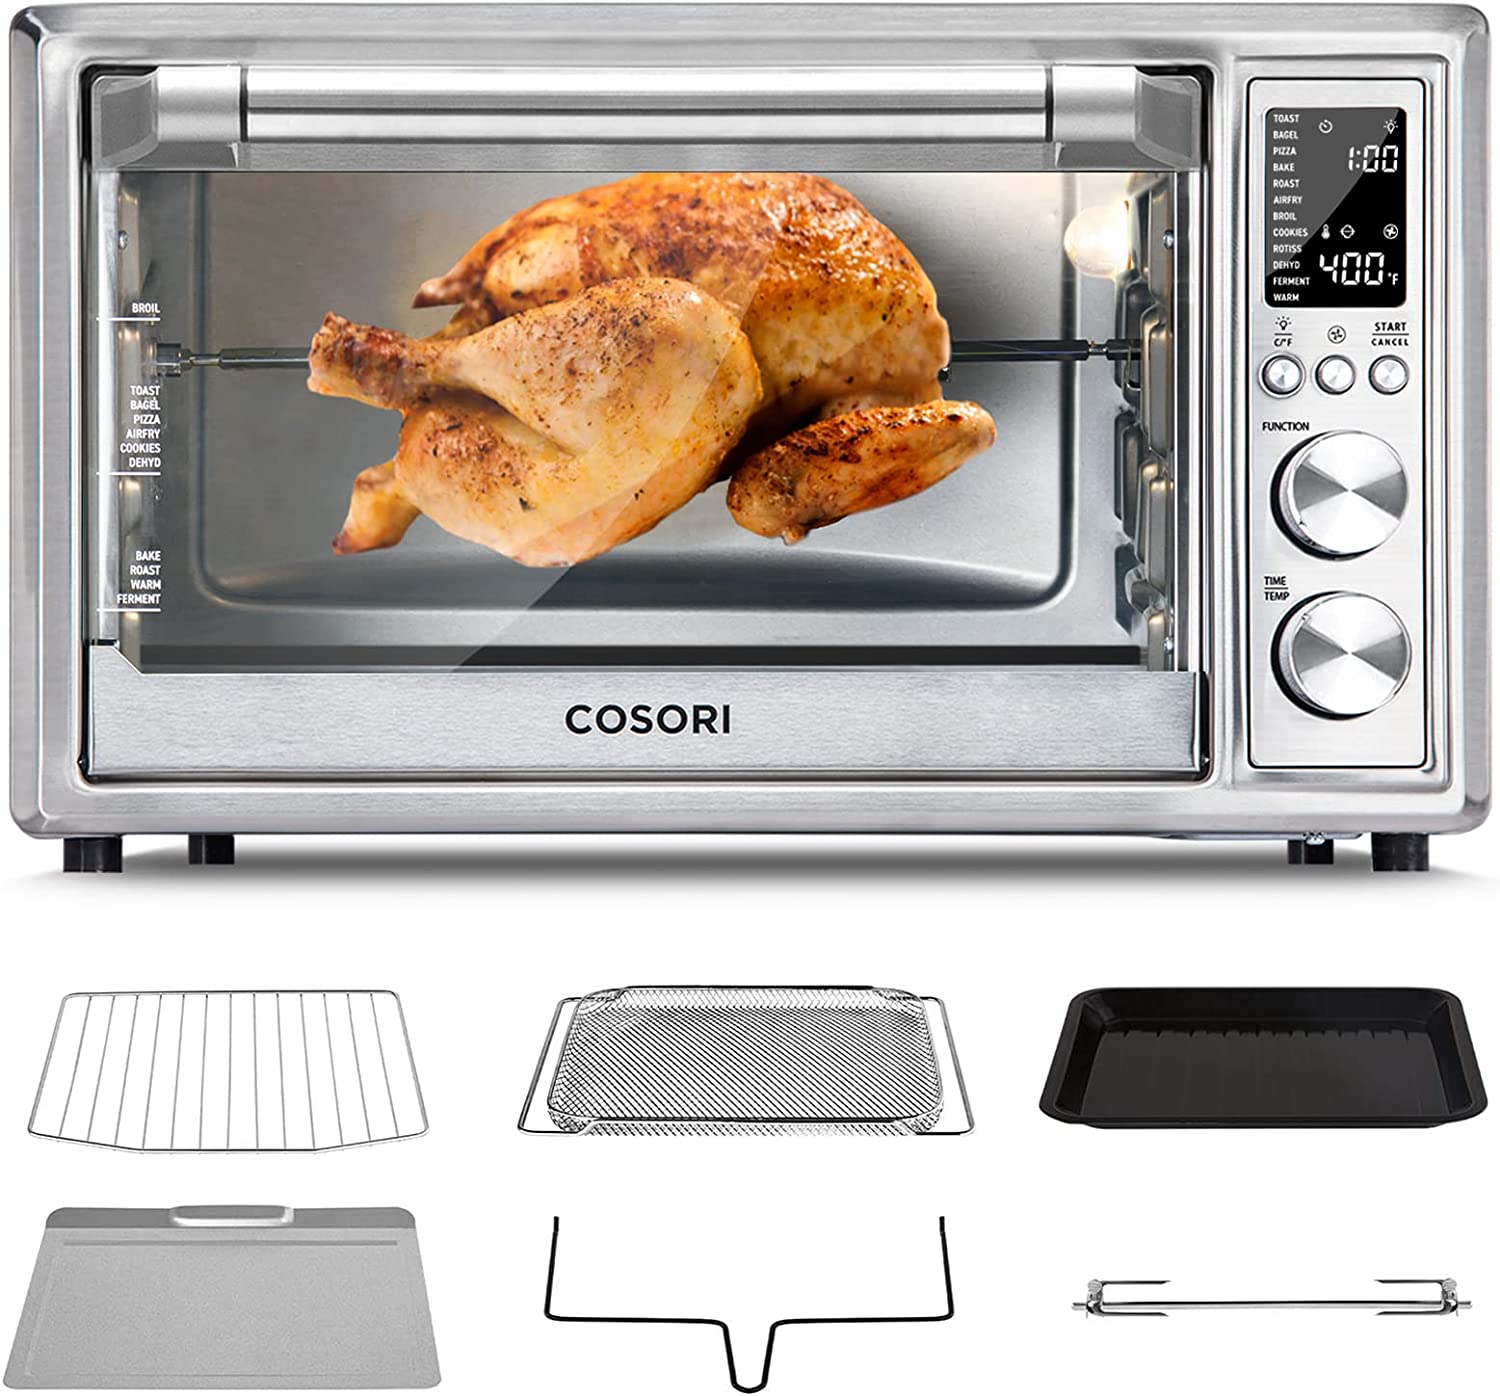 https://www.dontwasteyourmoney.com/wp-content/uploads/2020/07/cosori-12-in-1-toaster-convection-oven.jpg